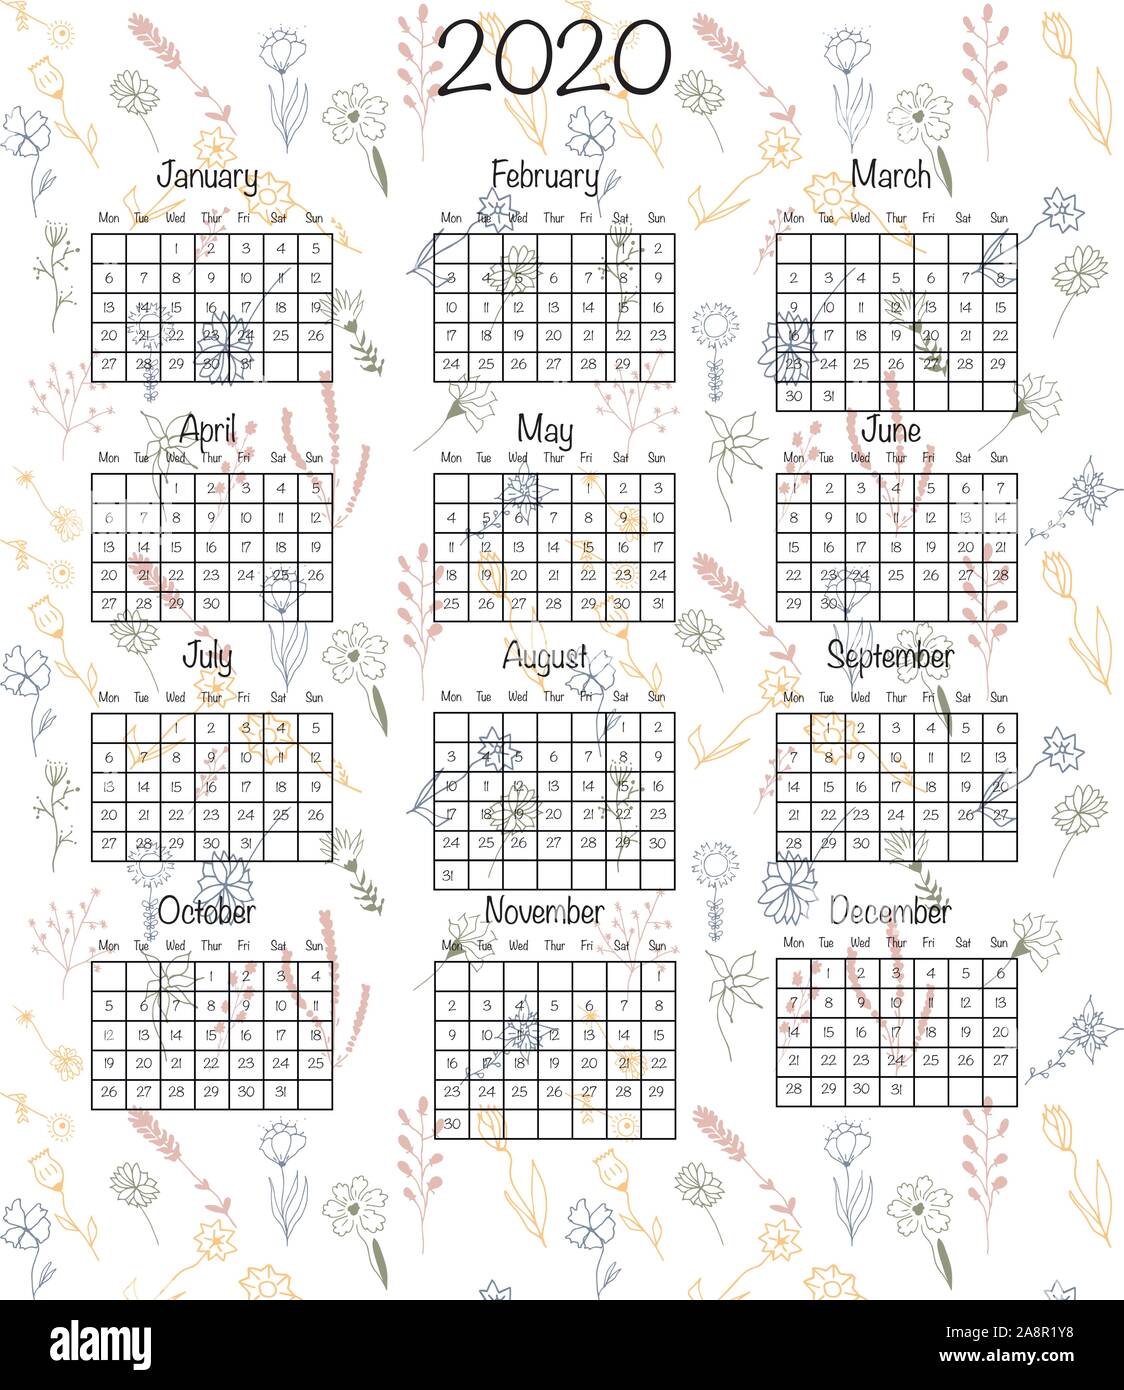 Calendar design for 20 in minimal simple hand drawn floral style ...